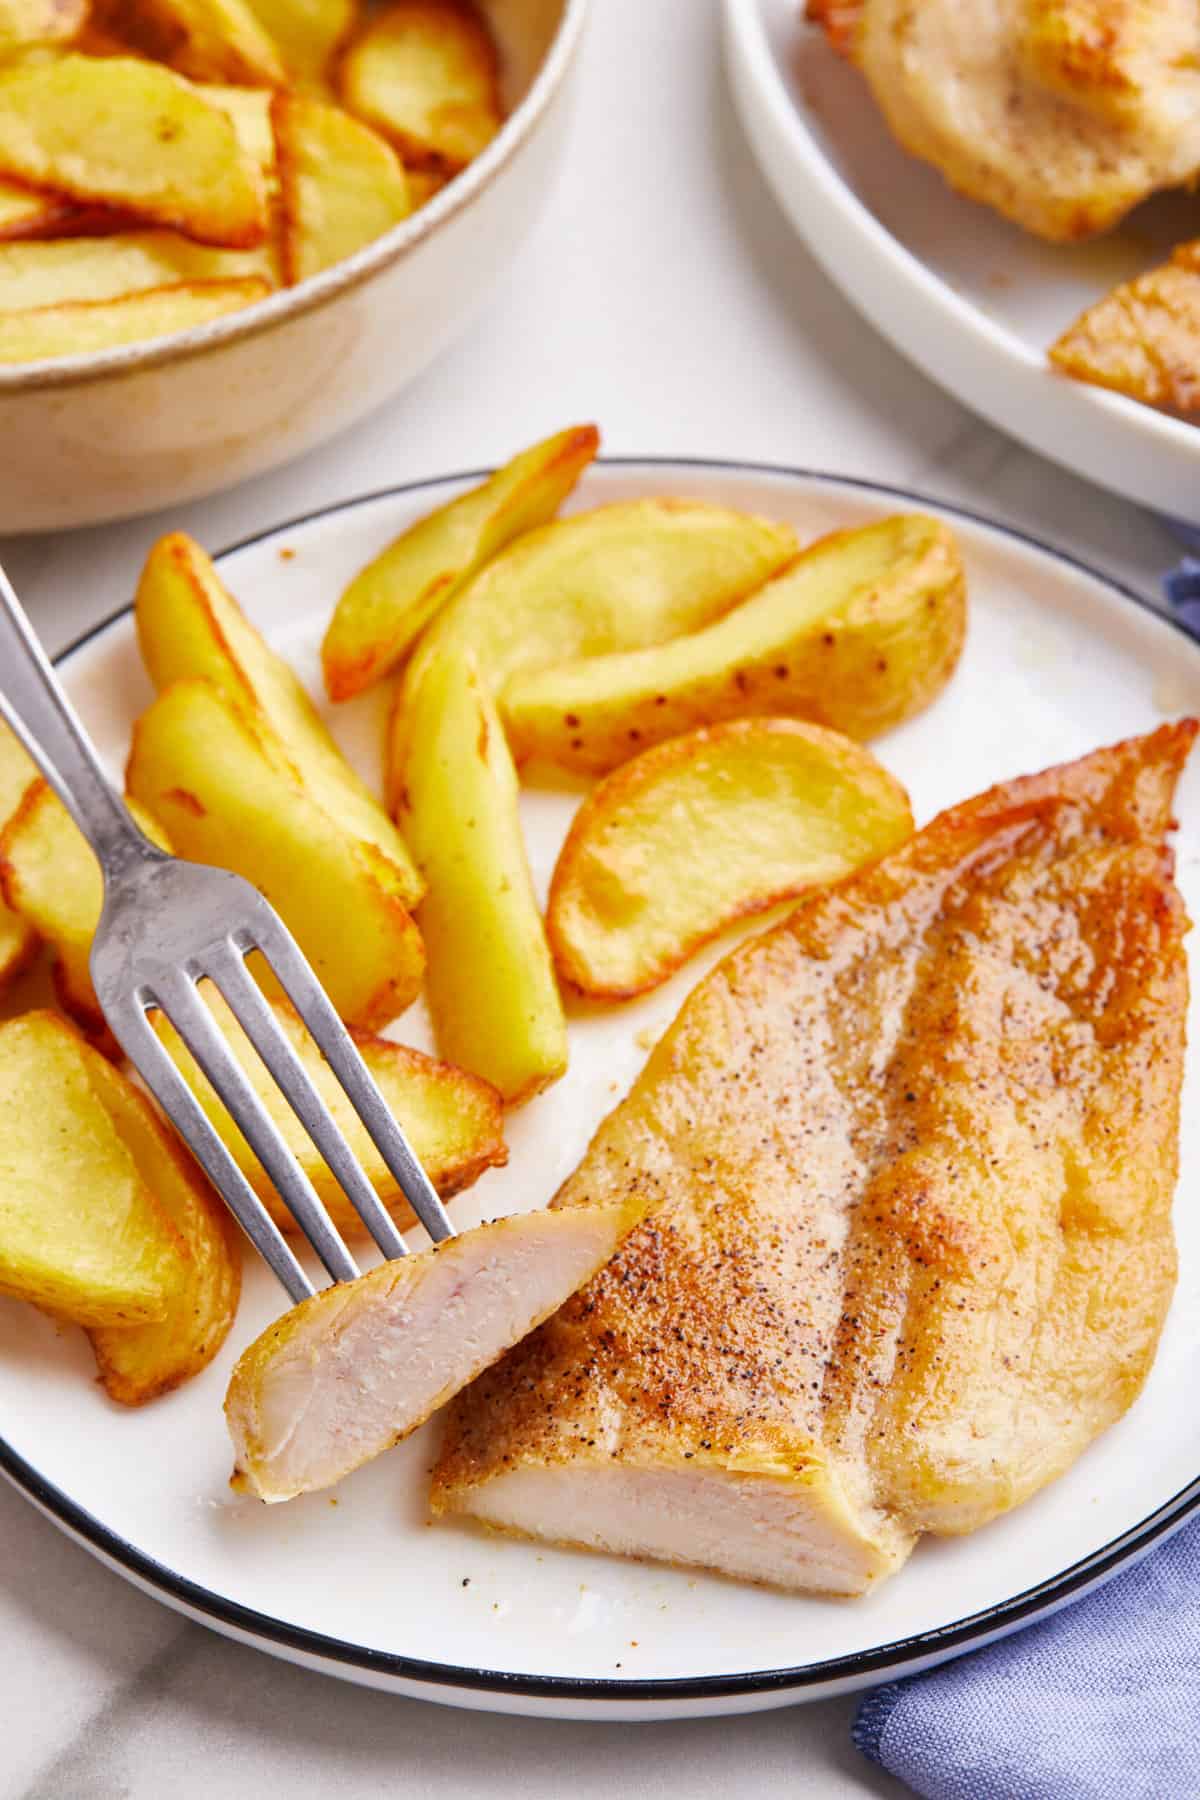 broiled chicken breast cut with a knife to show the cross section served on a white round plate with a side of fried potato wedges